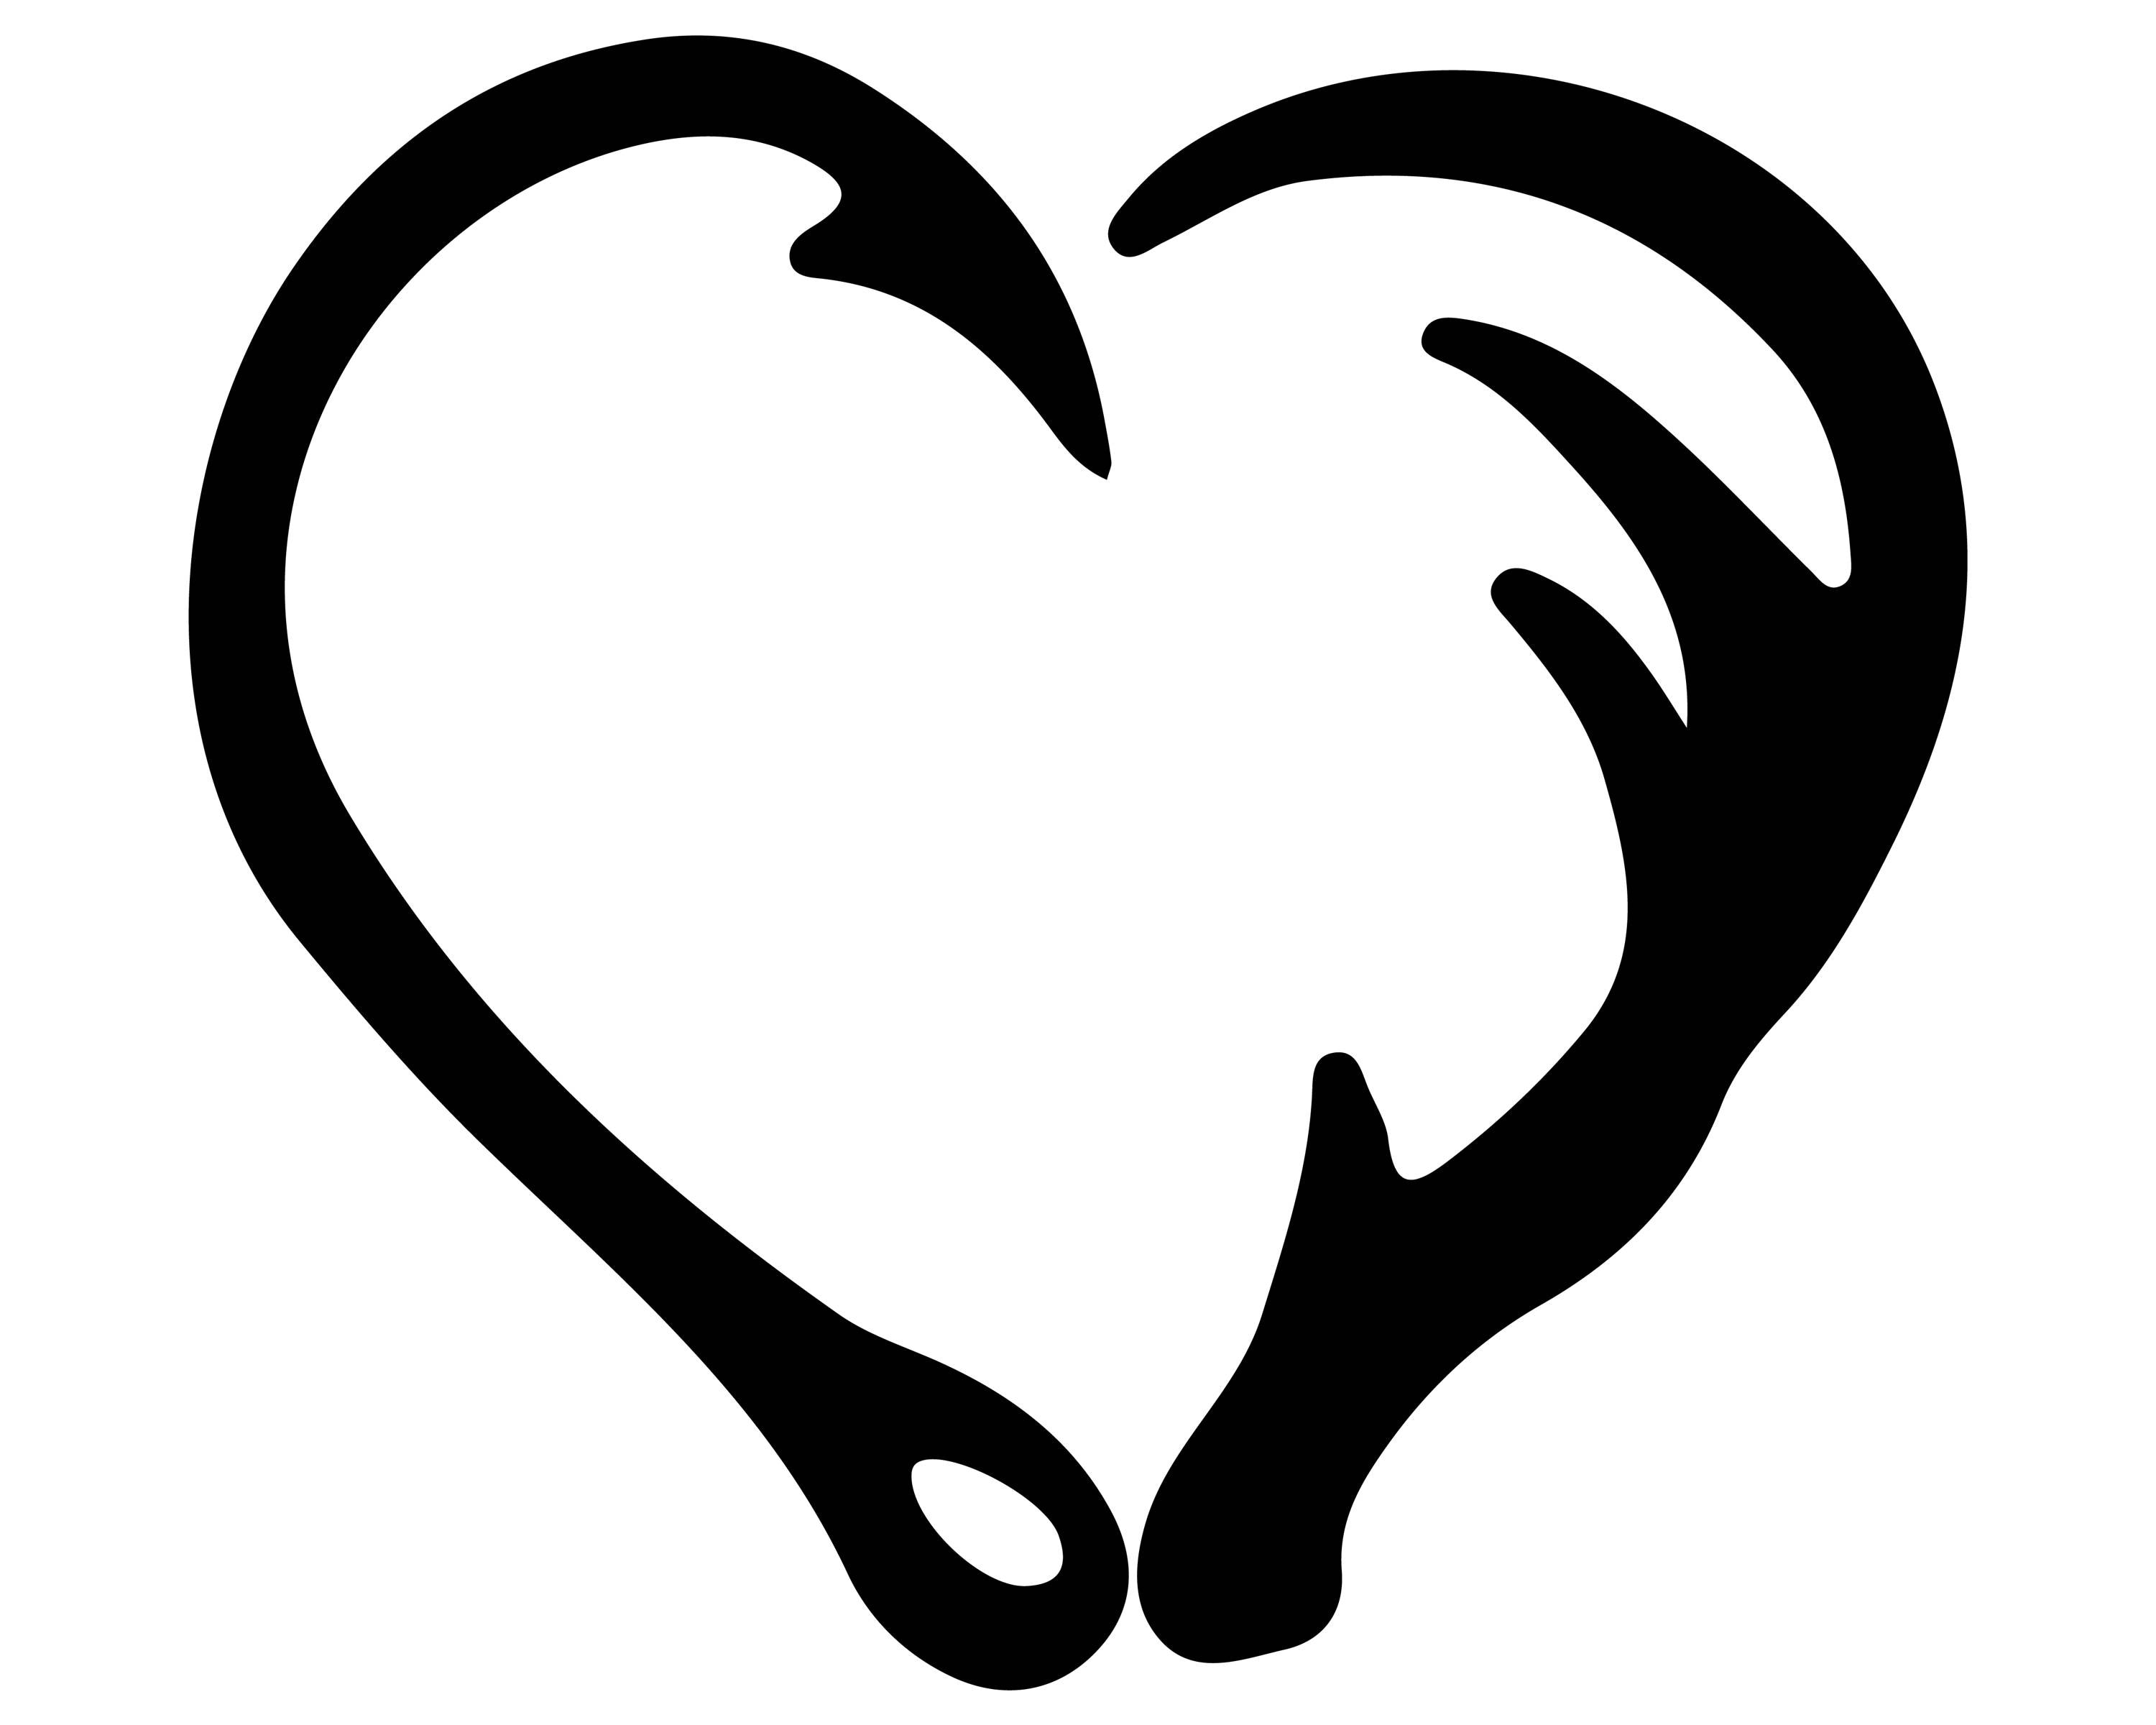 Fish Hook and Antler Heart Silhouette Clipart PNG and SVG